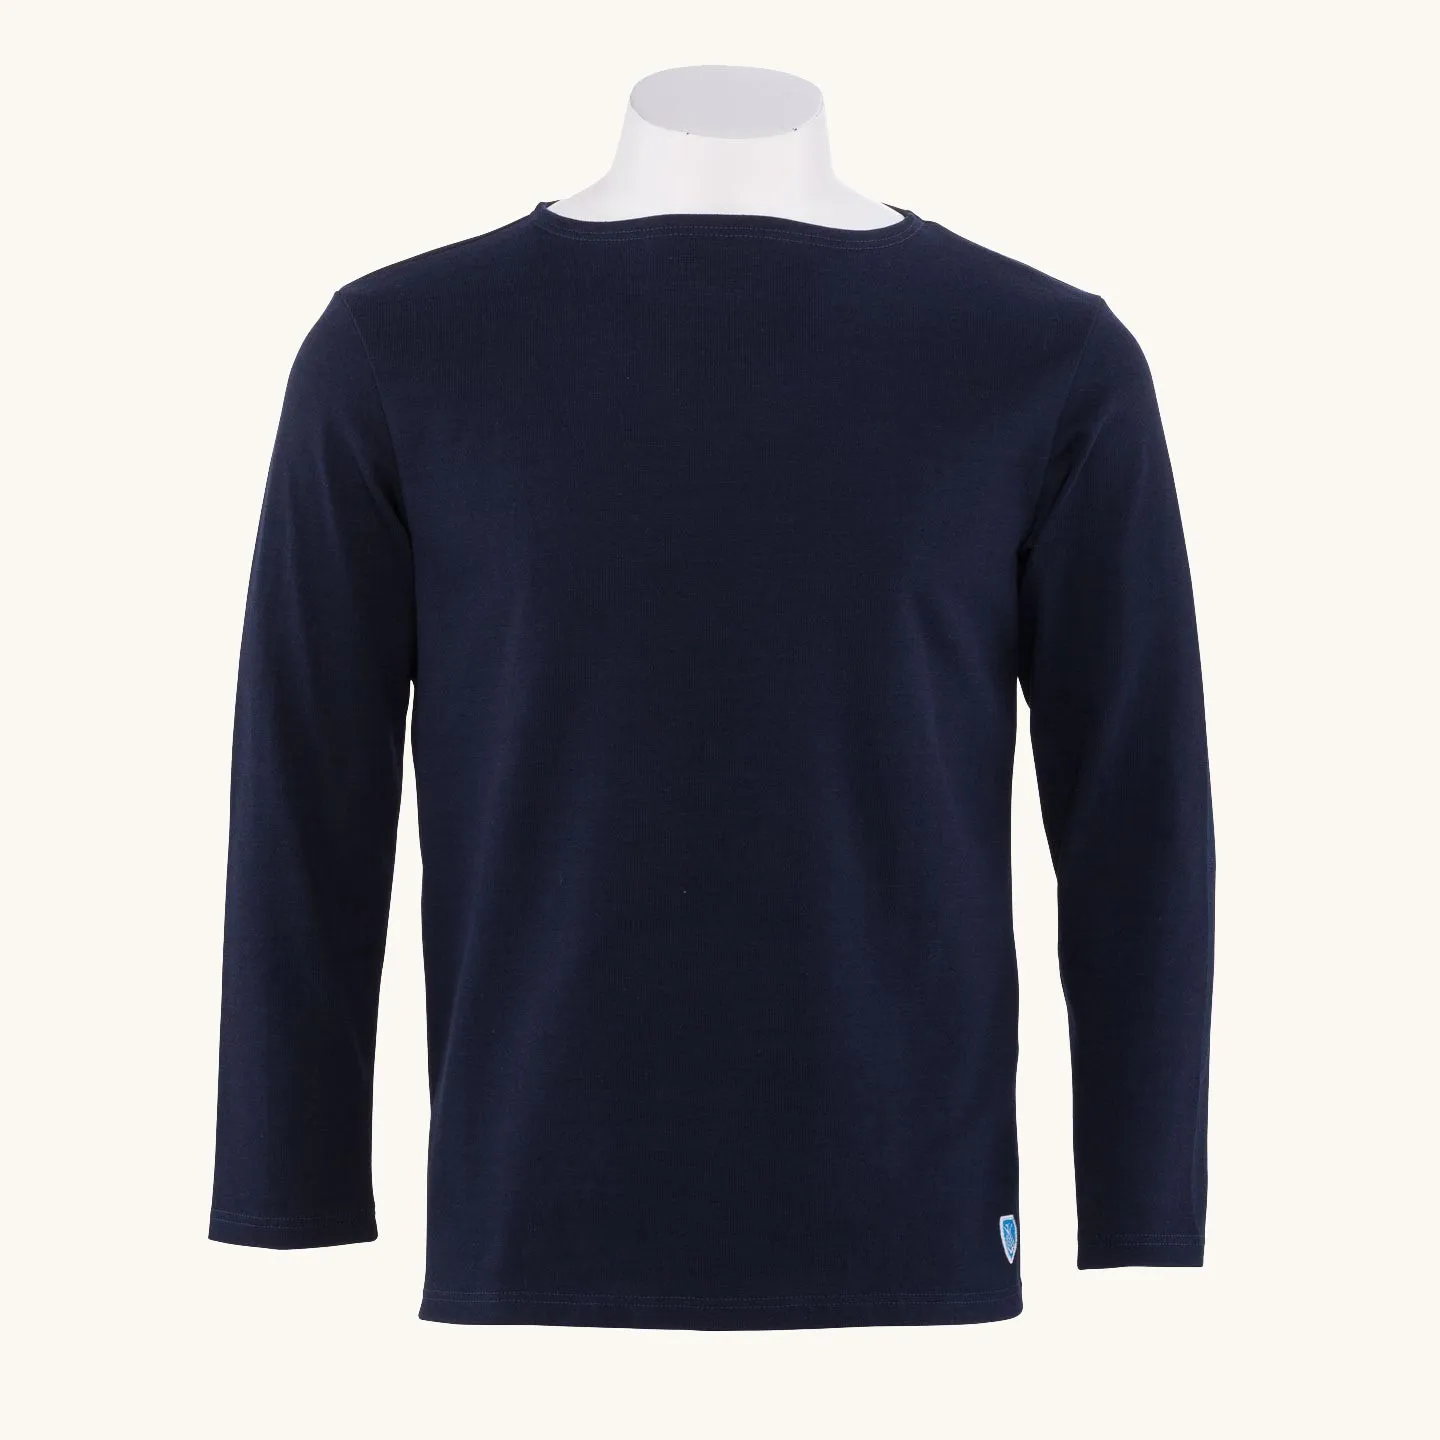 Basque shirt in Navy, unisex Orcival